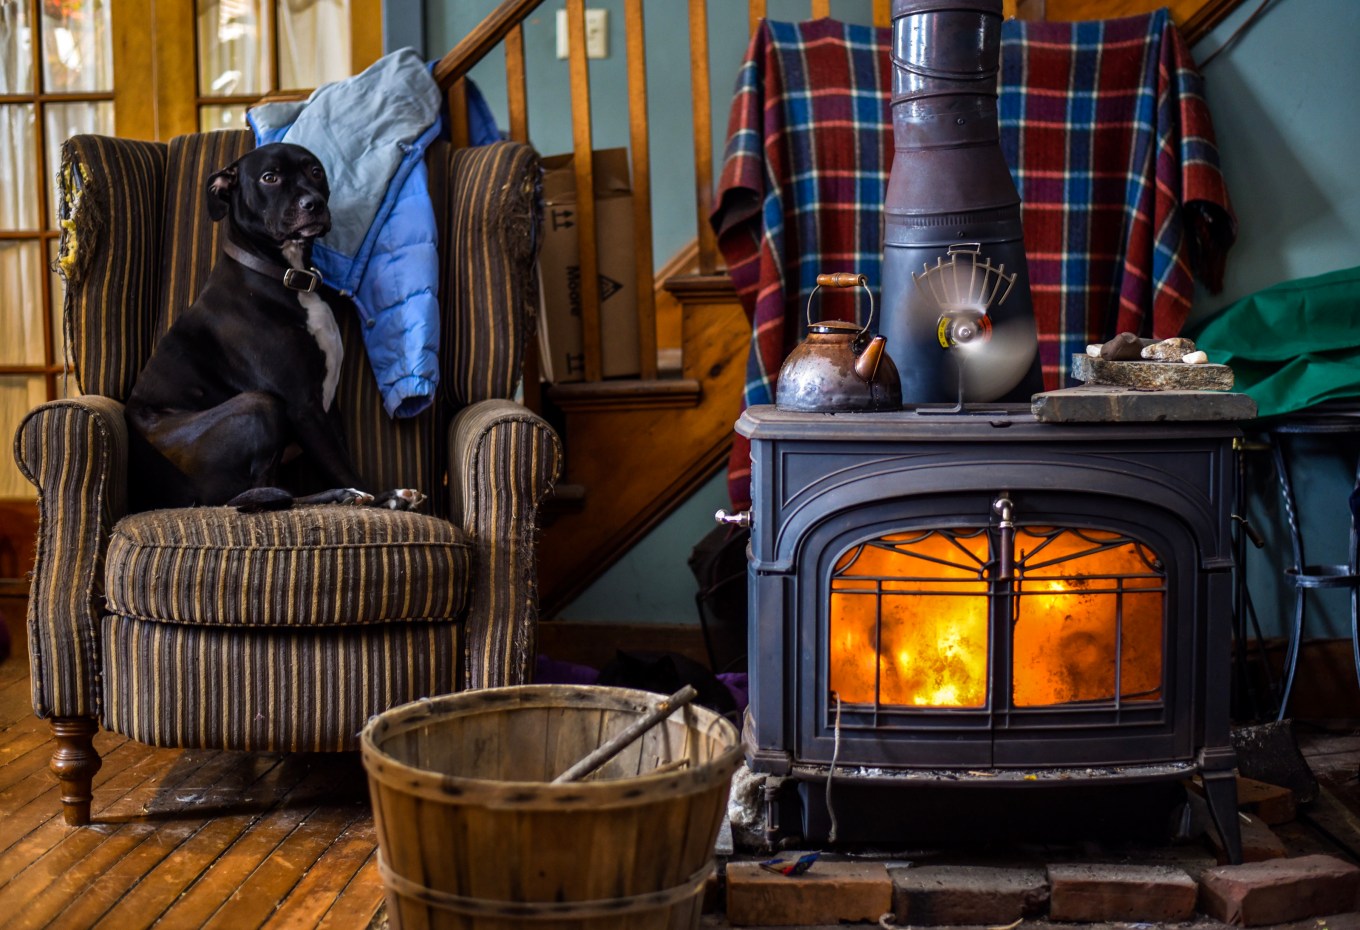 Dog sitting on chair in cabin location with wood stove